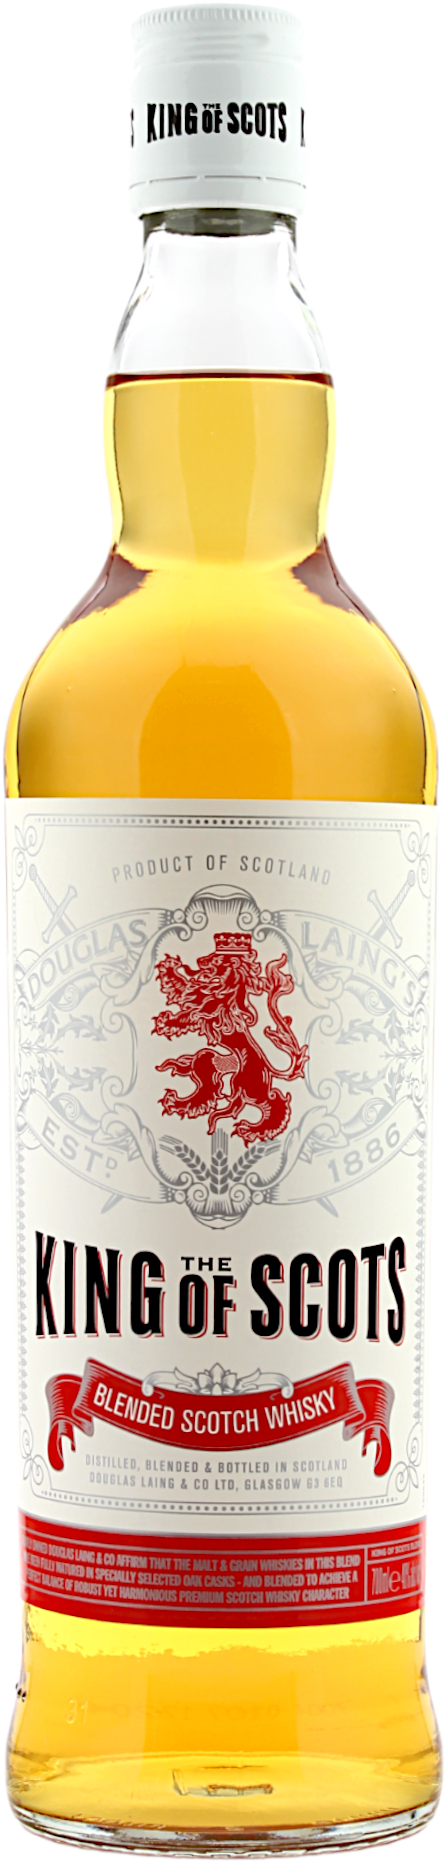 The King of Scots Blended Scotch Whisky 2007 40.0% 0,7l